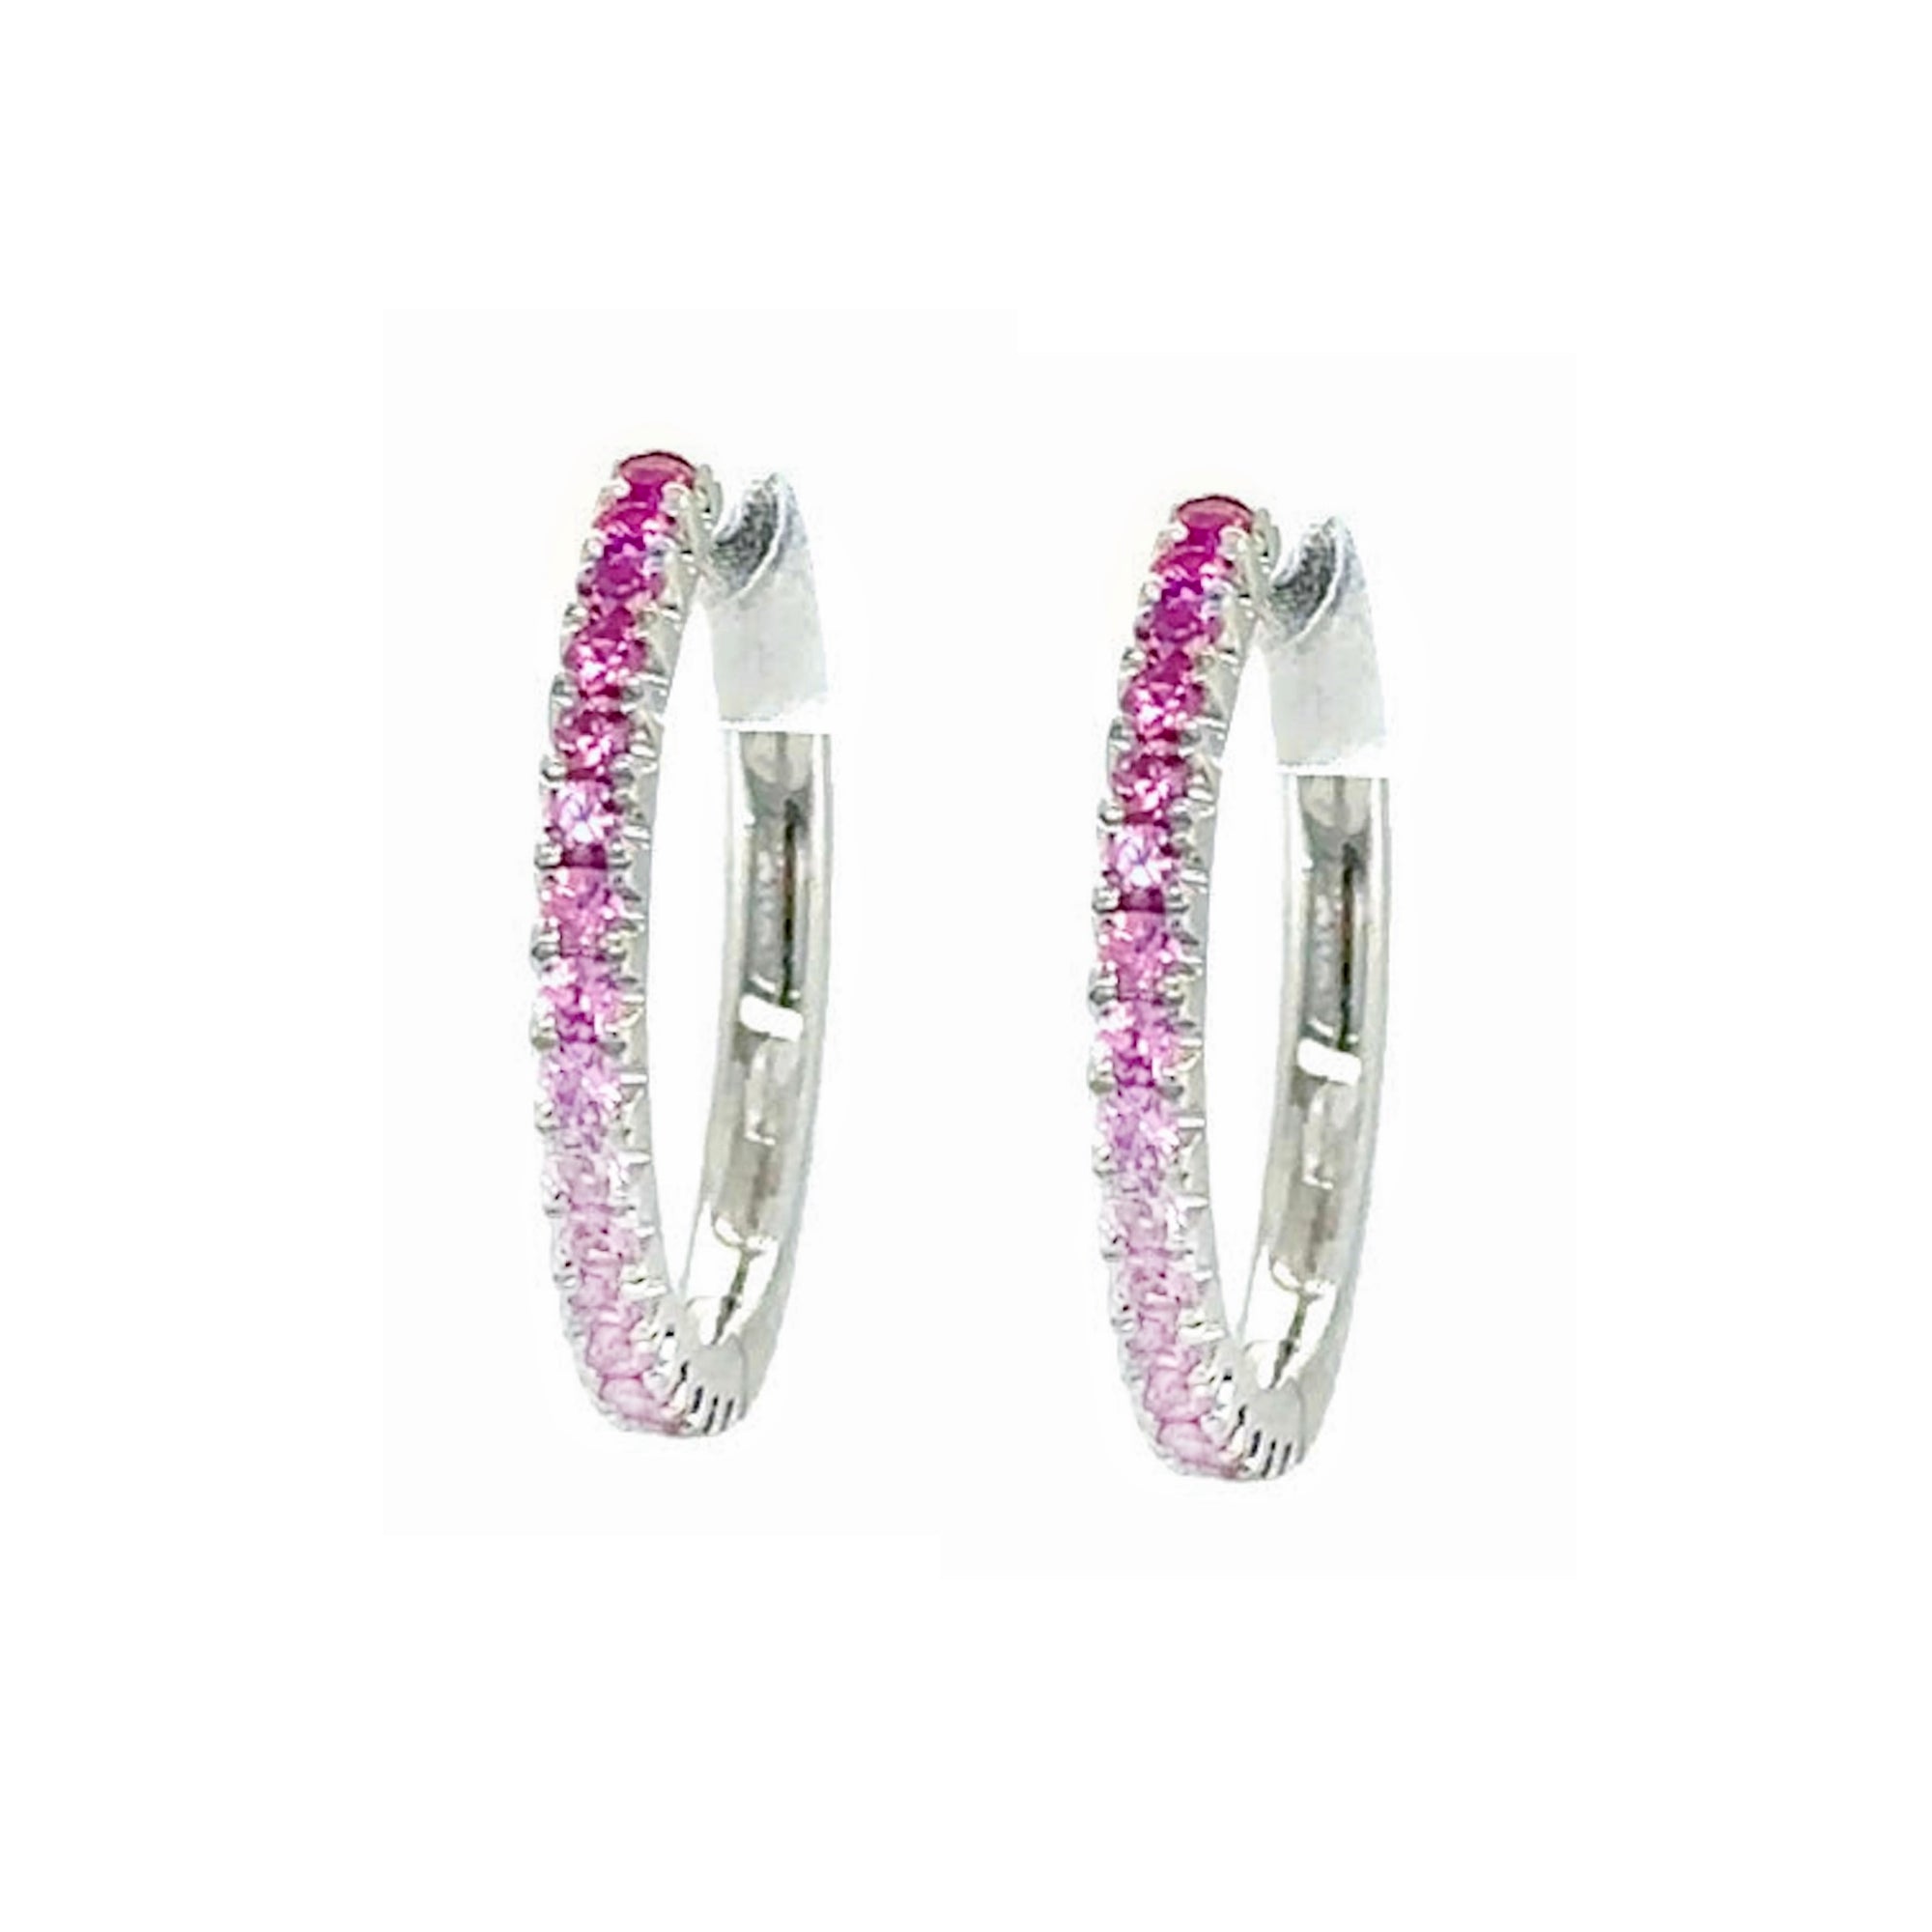 Ombre Pink Sapphire & 18k White Gold Hoop Earrings  by Lisa Nik available at Talisman Collection Fine Jewelers in El Dorado Hills, CA and online. Think Pink! These 18k white gold, hinged ,hoop earrings feature .39 carats of graduated color pink sapphires. Their classic design and inherent femininity up make them a lovely choice for everyday. Lisa Nik's gemstones are earth-mined, natural, and untreated, showcasing their unique and untouched beauty. 